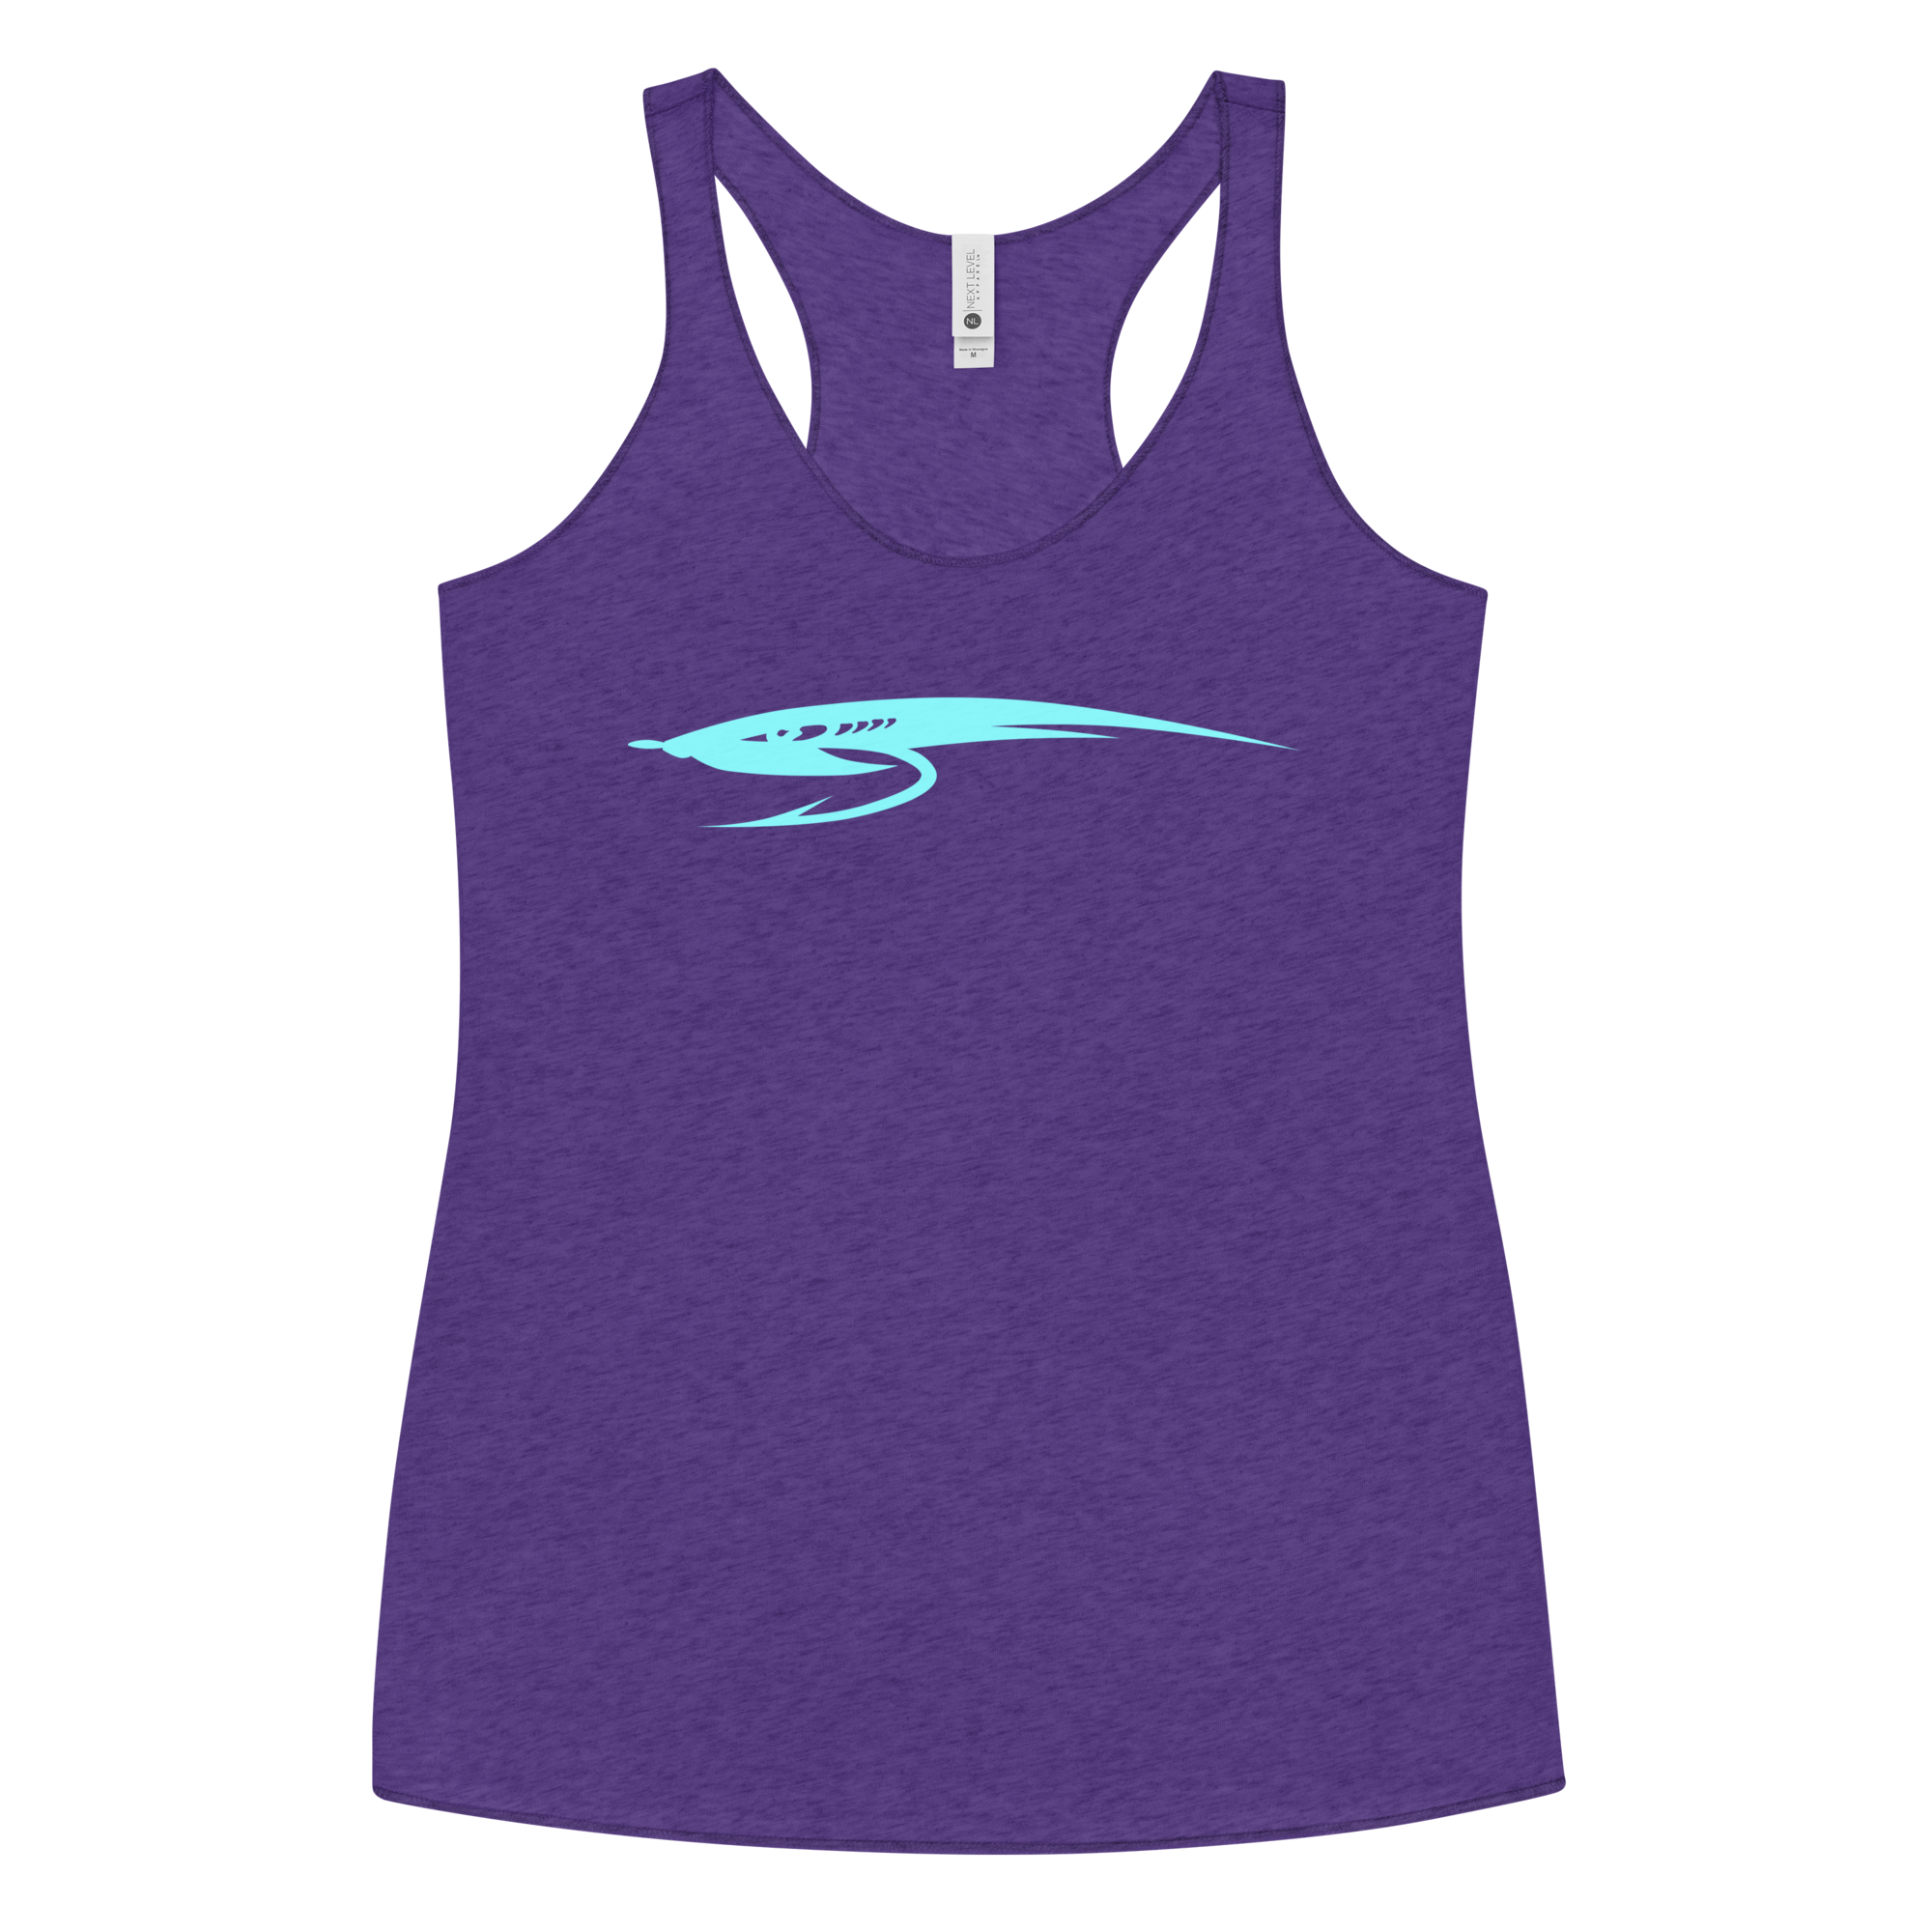 womens-racerback-tank-top-purple-rush-front-6517191135bba.png